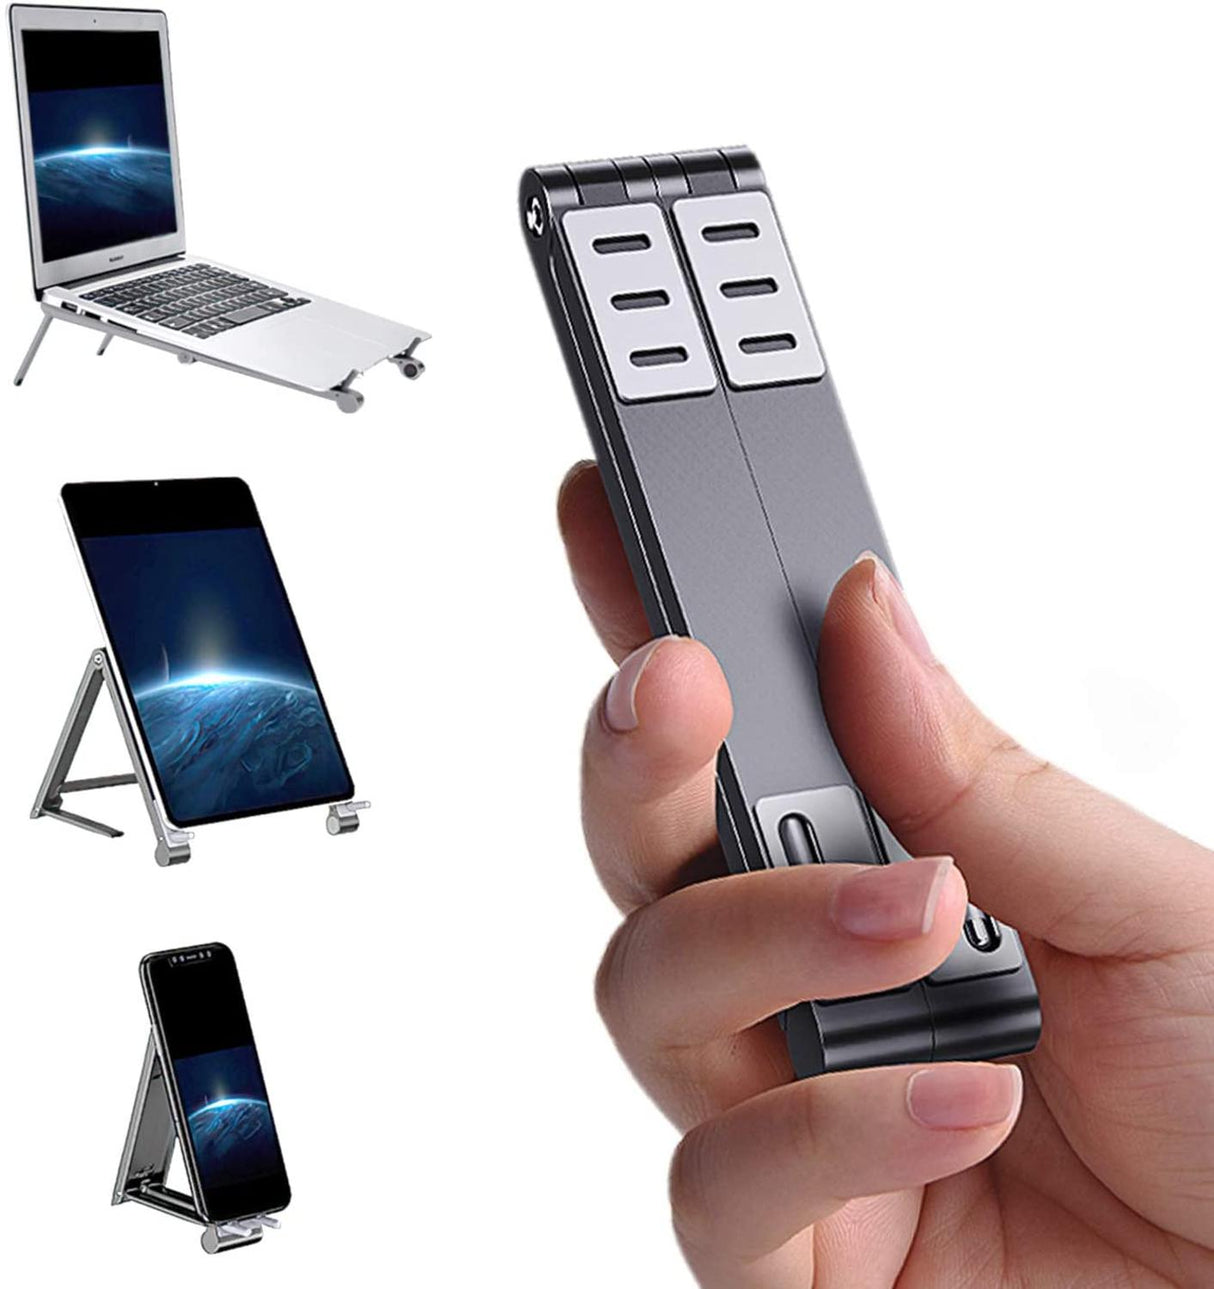 Adjustable Stand Universal Holder For iOS devices Mobile Phone and laptops